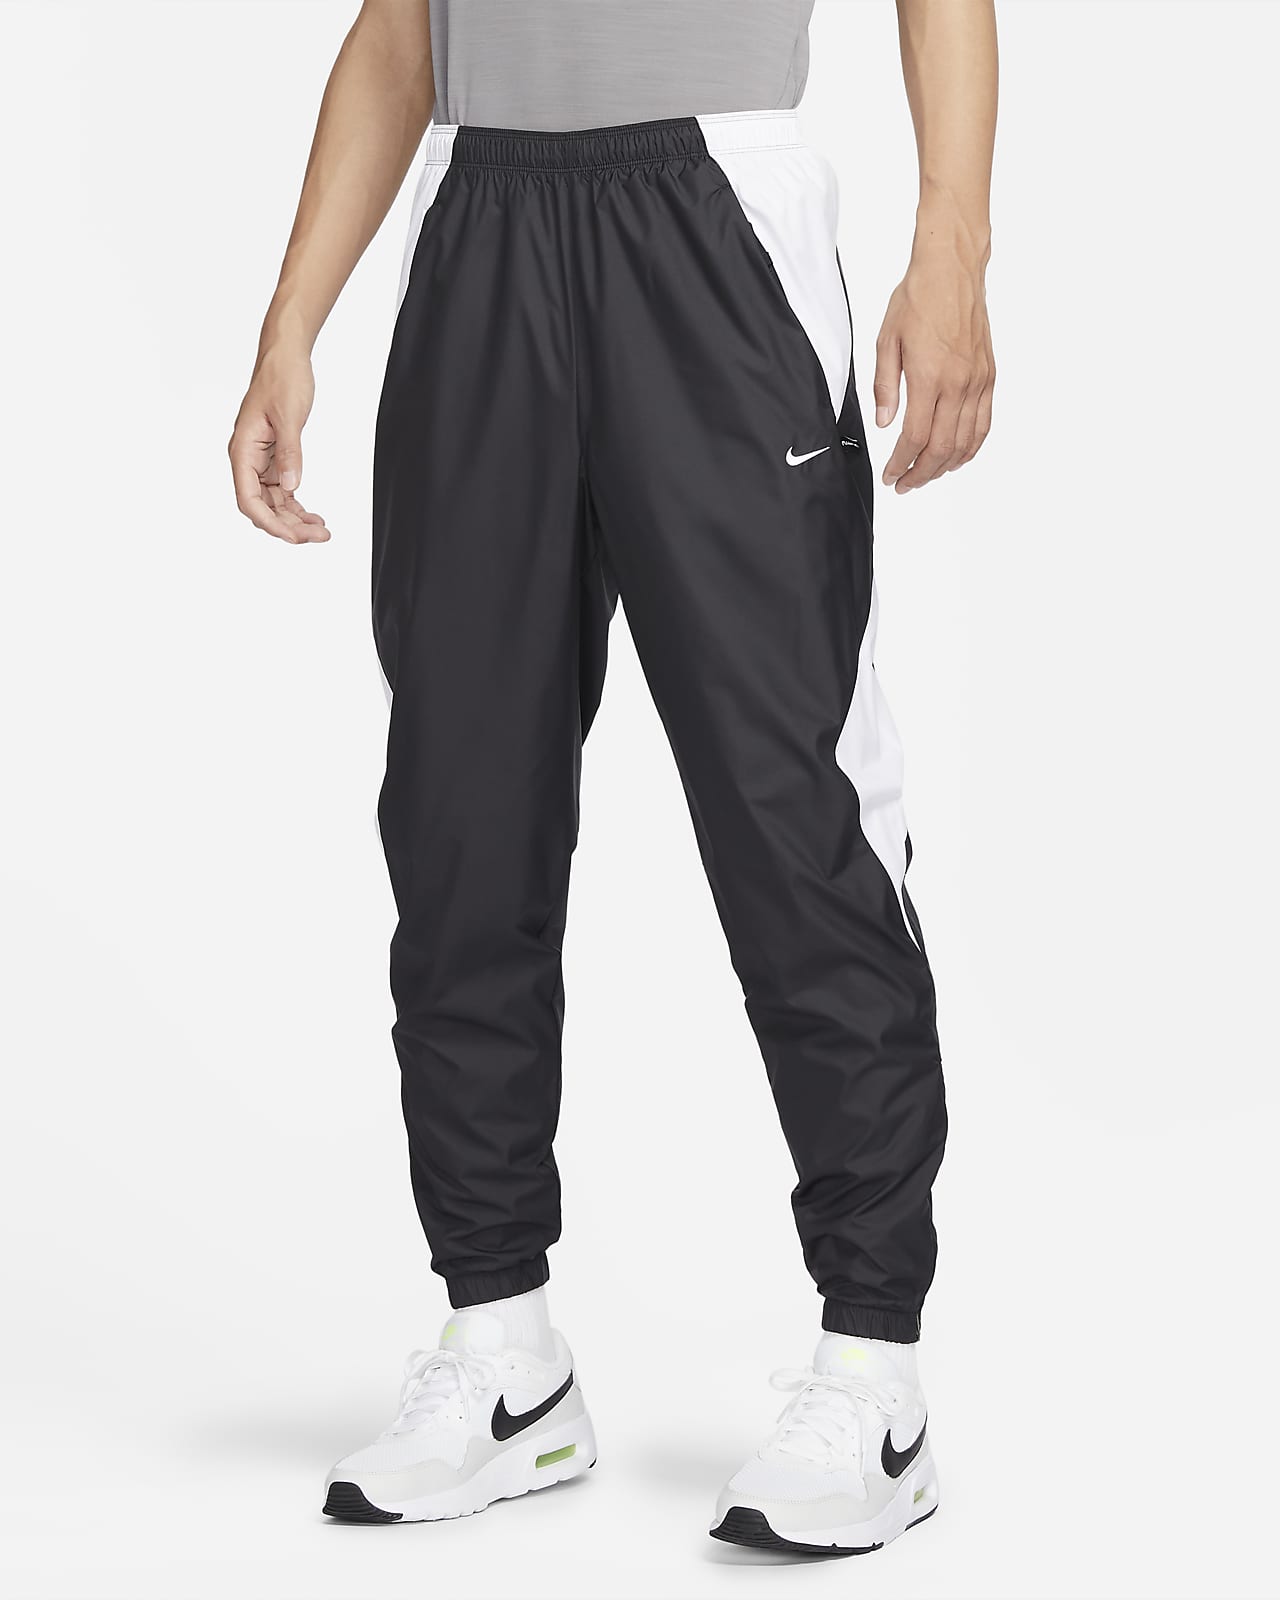 Nike Mens Dri Fit Academy Football Pants BlackWhiteWhiteWhite in  Bangalore at best price by Nike INDIA Pvt Ltd Head Office  Justdial